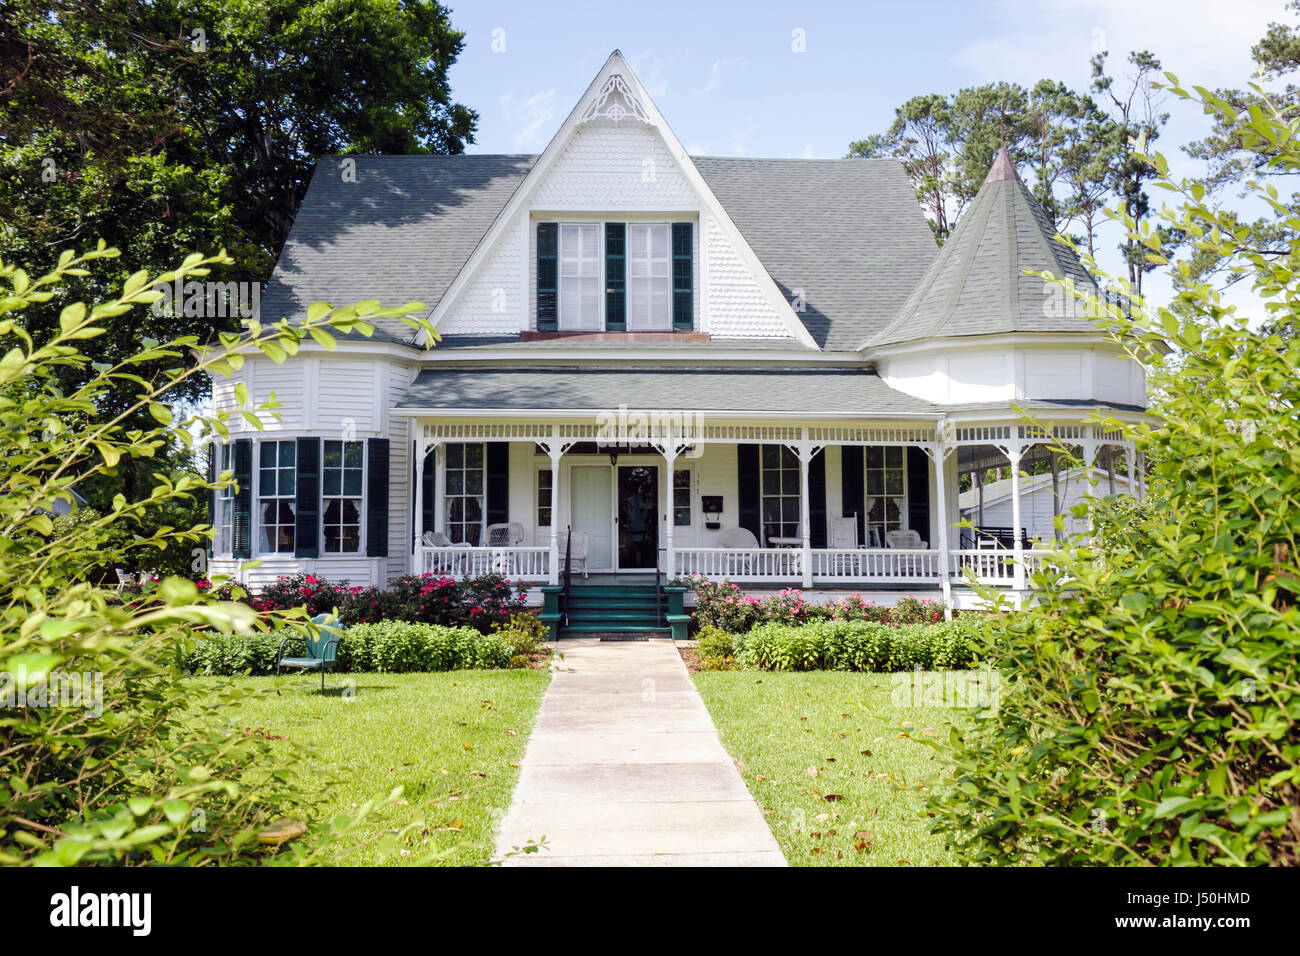 Monroeville Alabama,Pineville Road,historic homes,Stallworth home,Queen Anne,columns,wraparound porch,turret,gabled roof,front yard,tree,street,sidewa Stock Photo